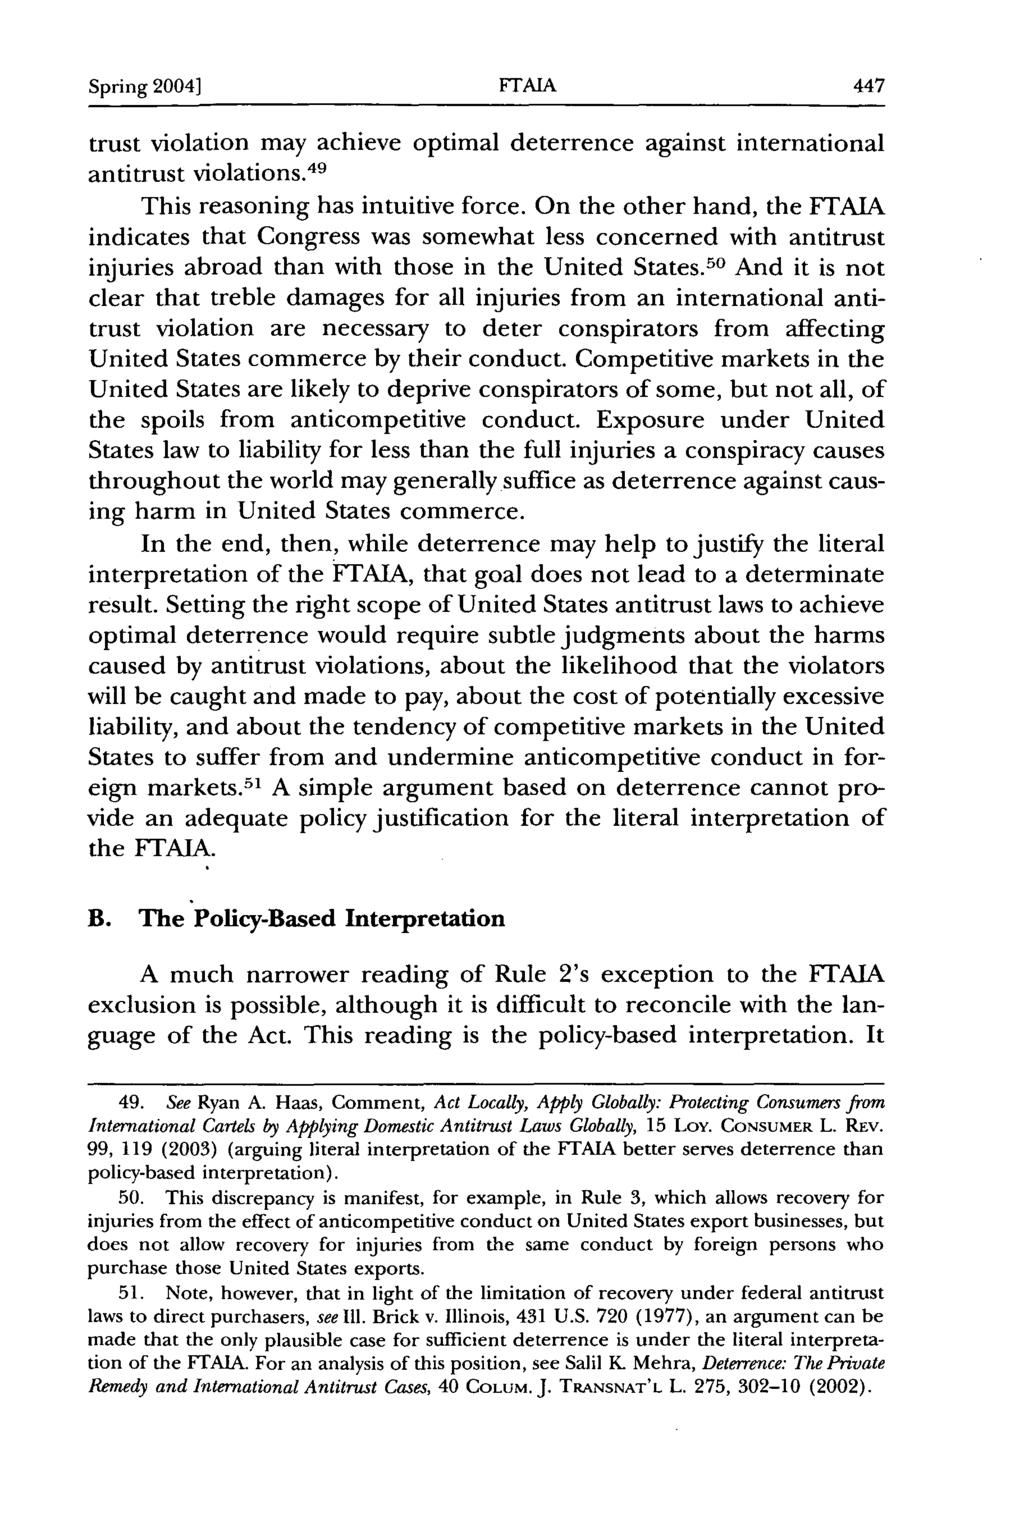 Spring 2004] FTAIA trust violation may achieve optimal deterrence against international antitrust violations. 49 This reasoning has intuitive force.